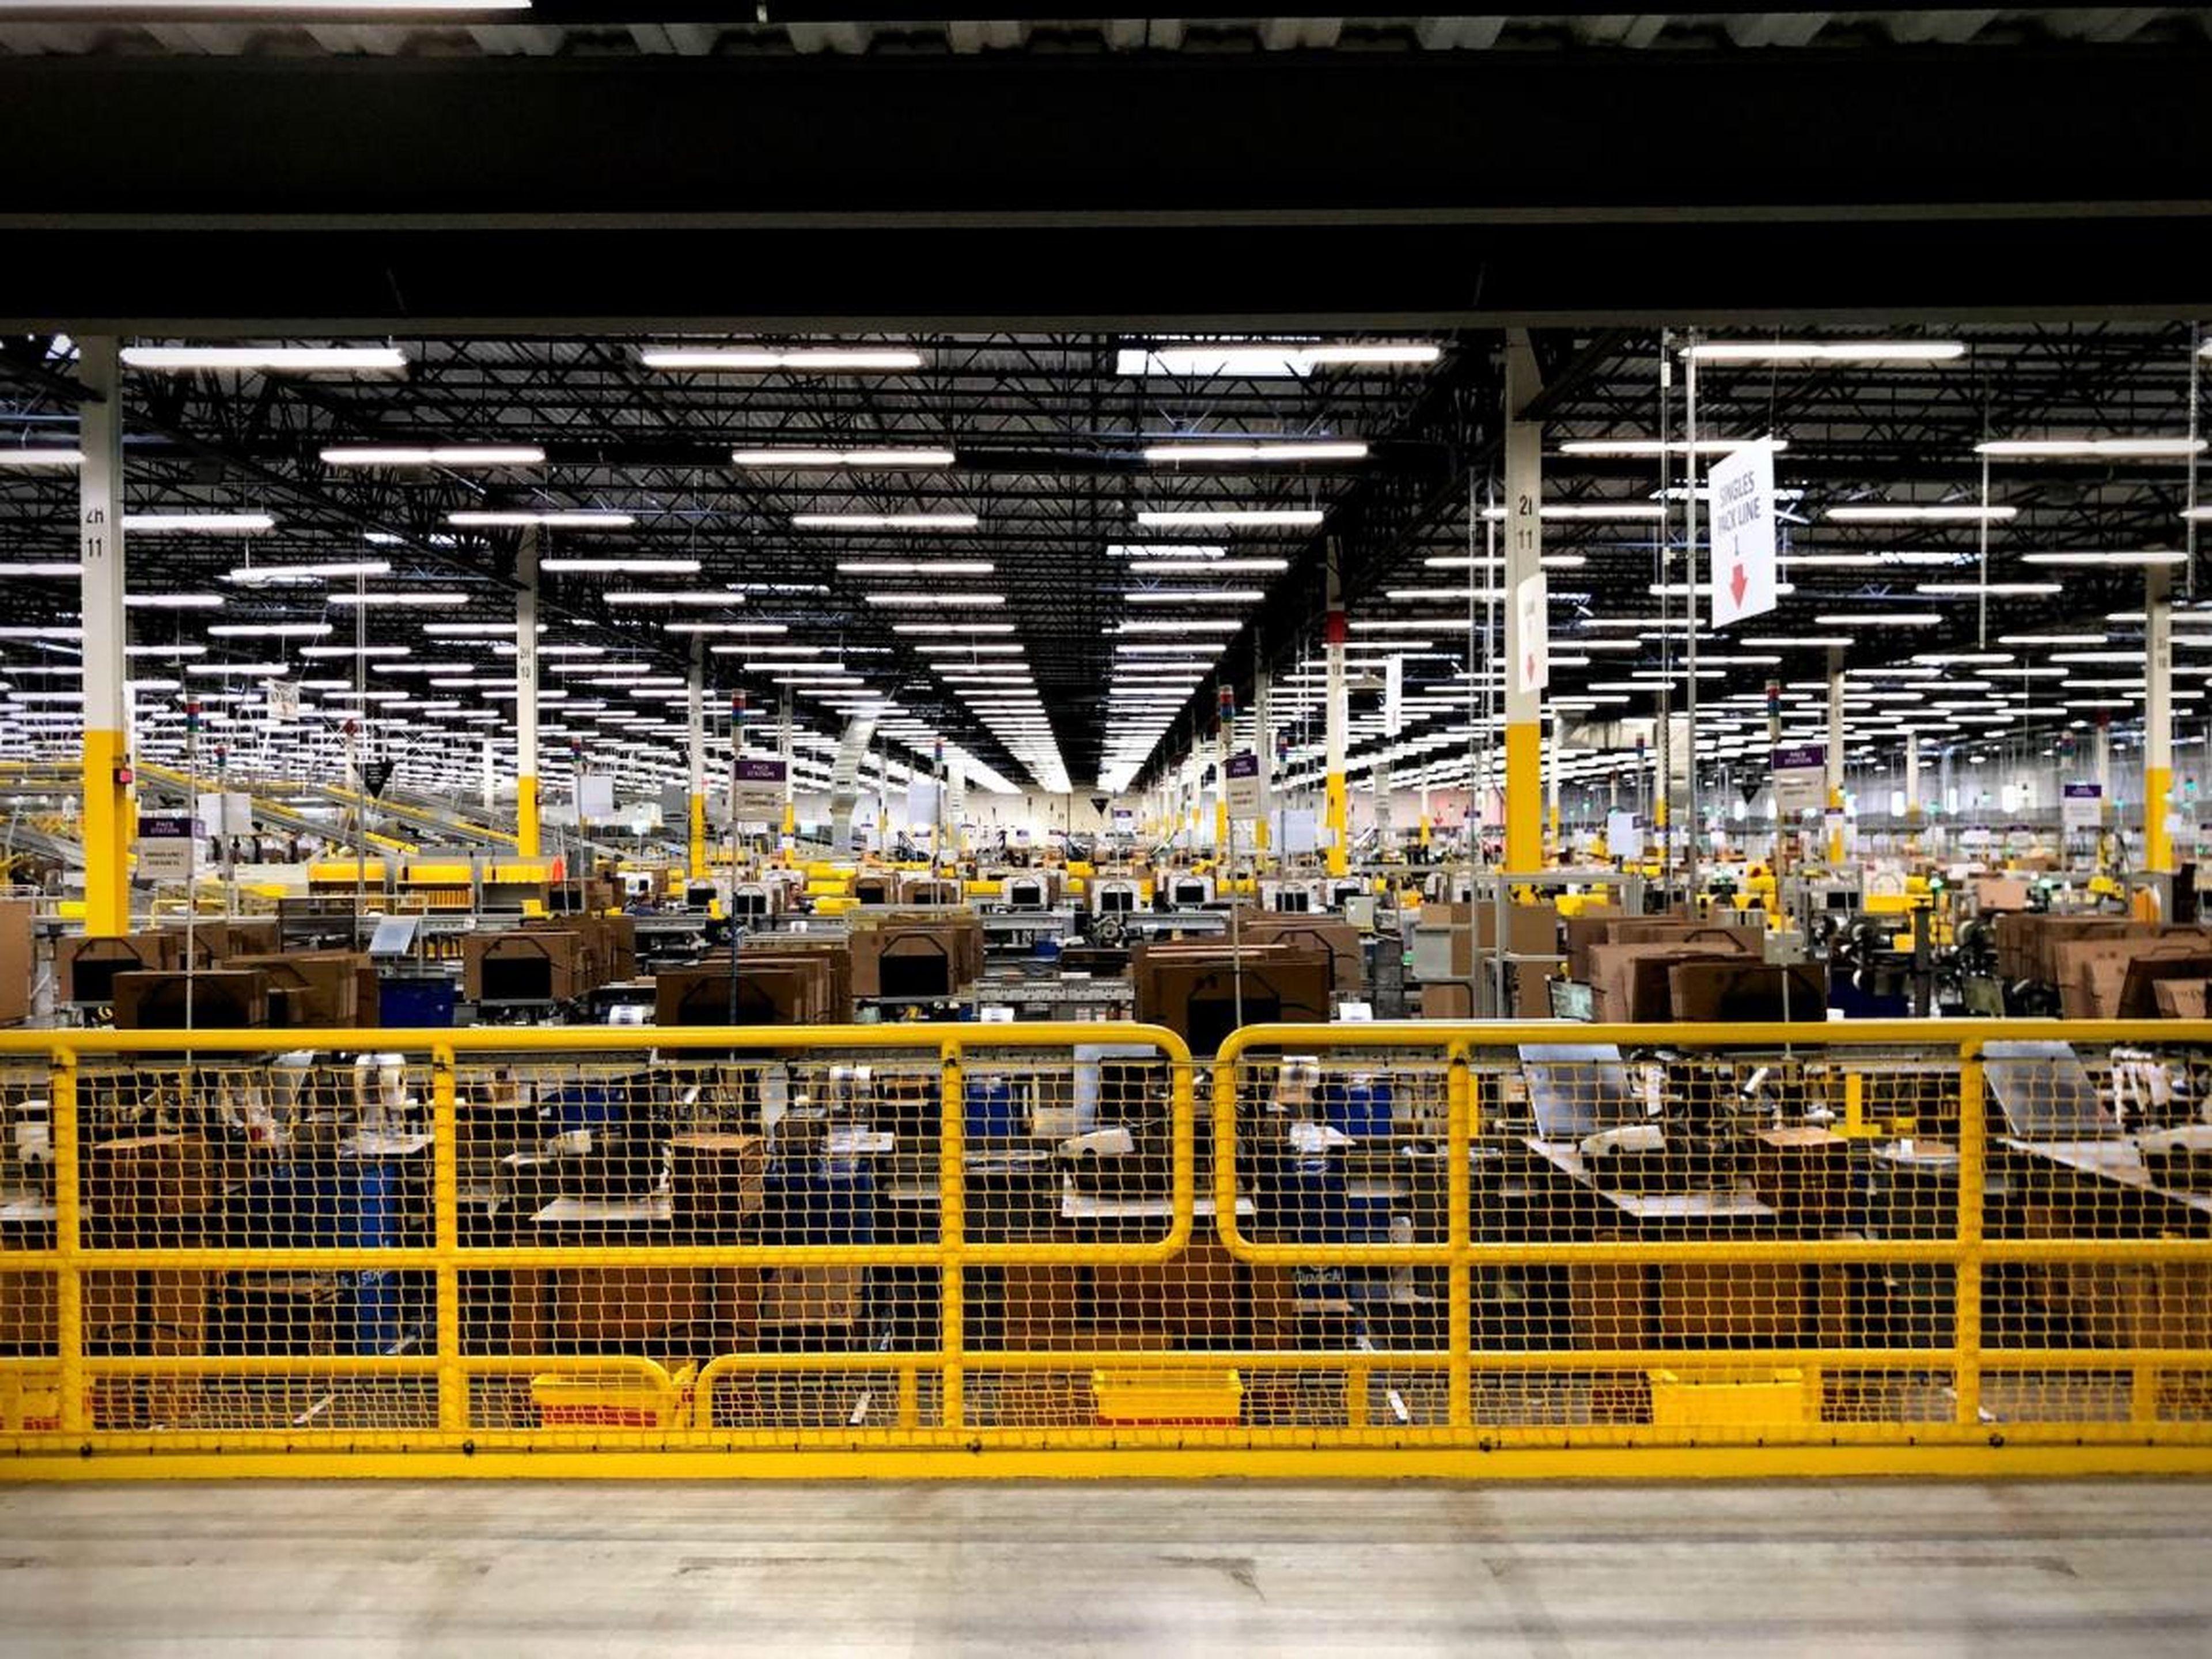 The facility is vast — just under 1 million square feet — and contains 18 miles of conveyor belts.